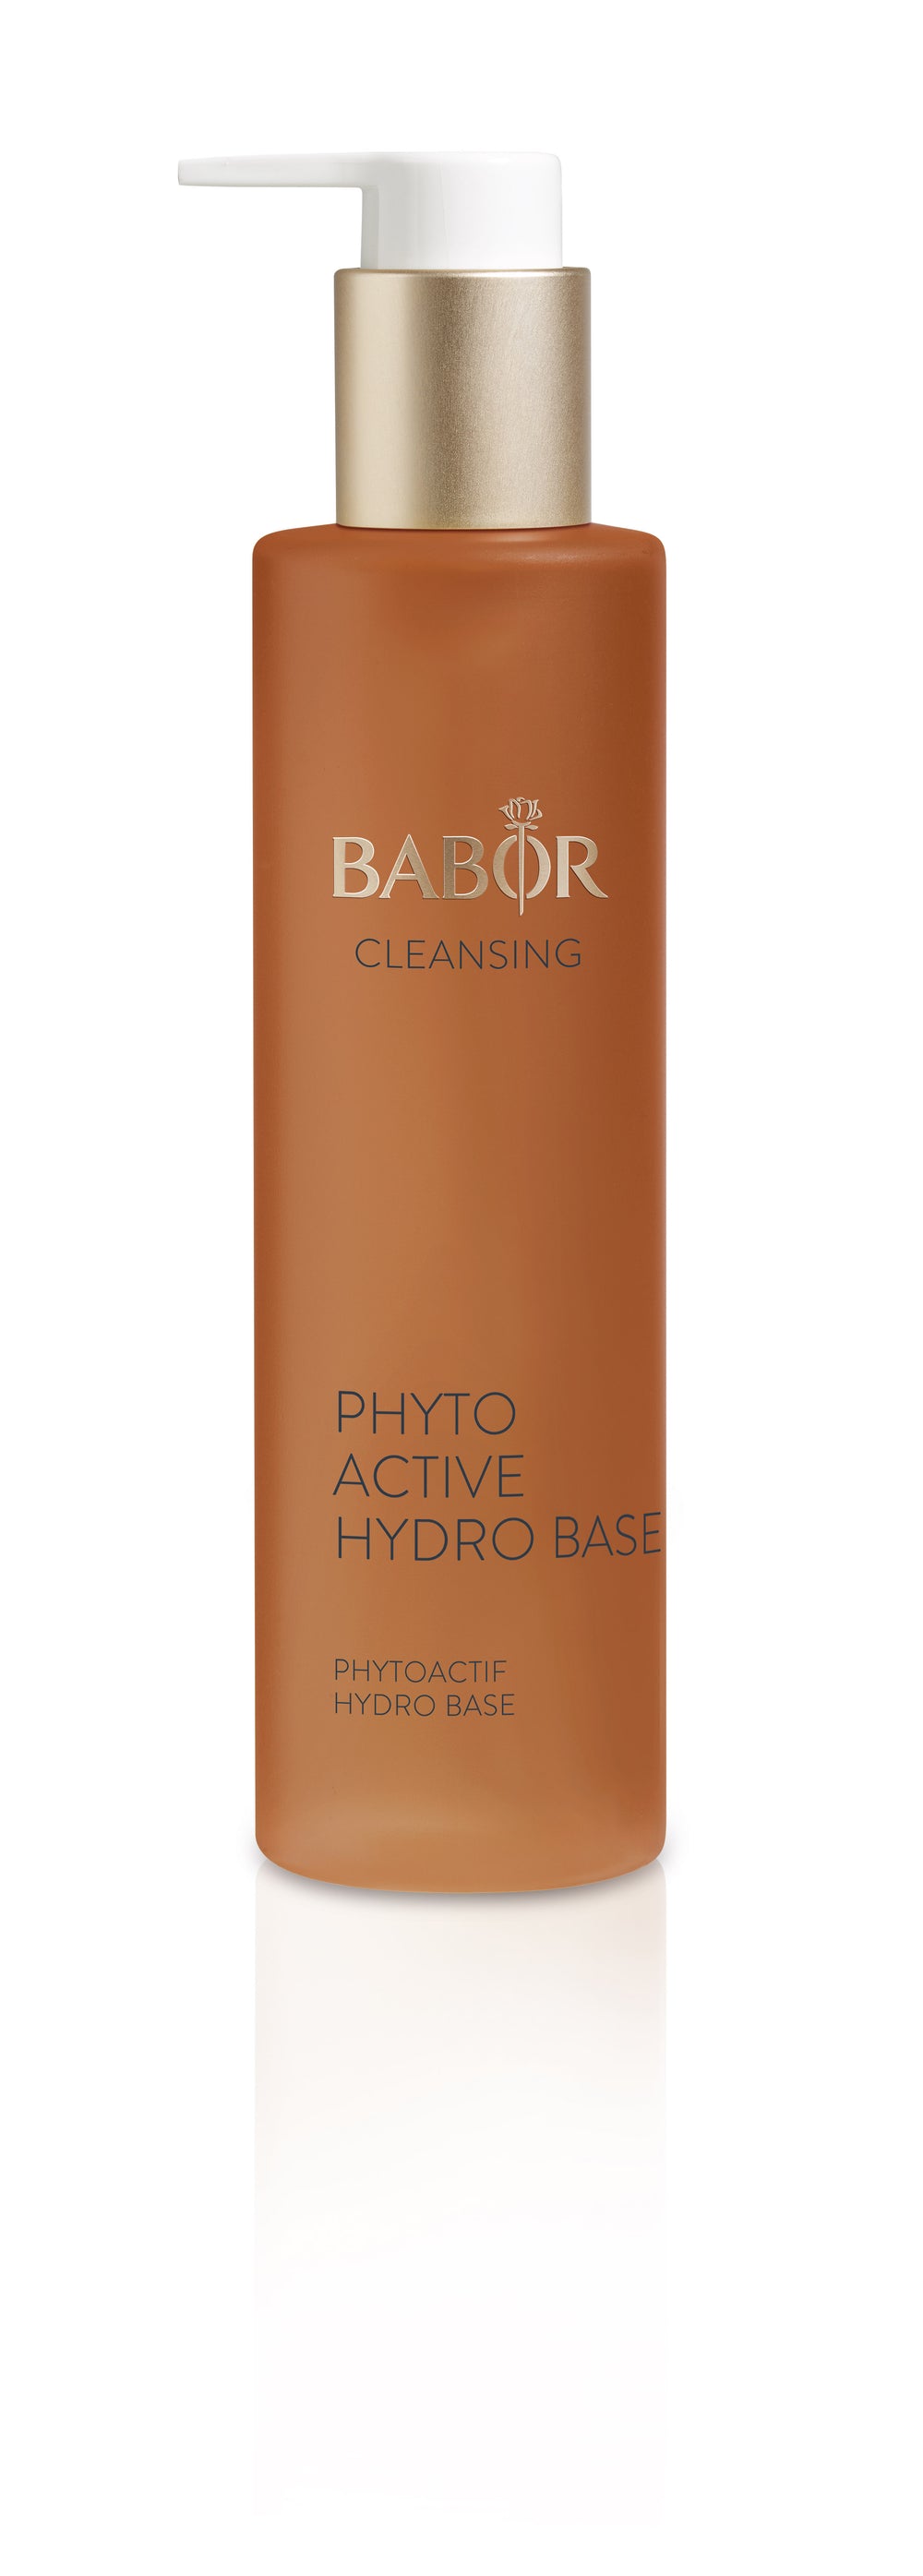 Phytoactive Hydro Base is part of a unique 2-step deep action cleanser that combines the natural cleansing powers of water and oil to remove water and oil soluble products thoroughly yet gently. Phytoactive Hydro Base was designed to treat, refresh, and lend radiance to the skin while you cleanse. Phytoactive Hydro Base is the 2nd Step in our bi-phase cleansing system (1st step HY-ÖL sold separately).